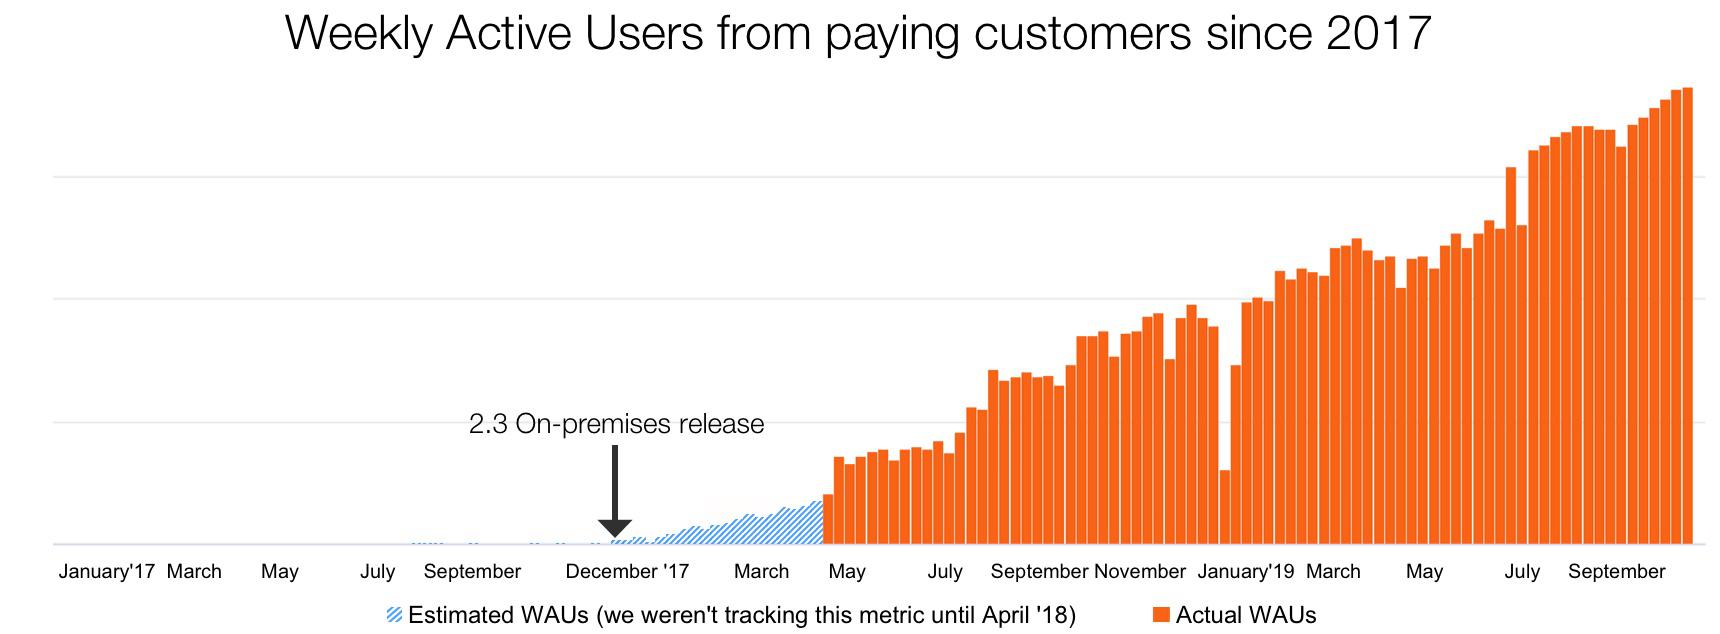 Weekly Active Users from paying customers since 2017